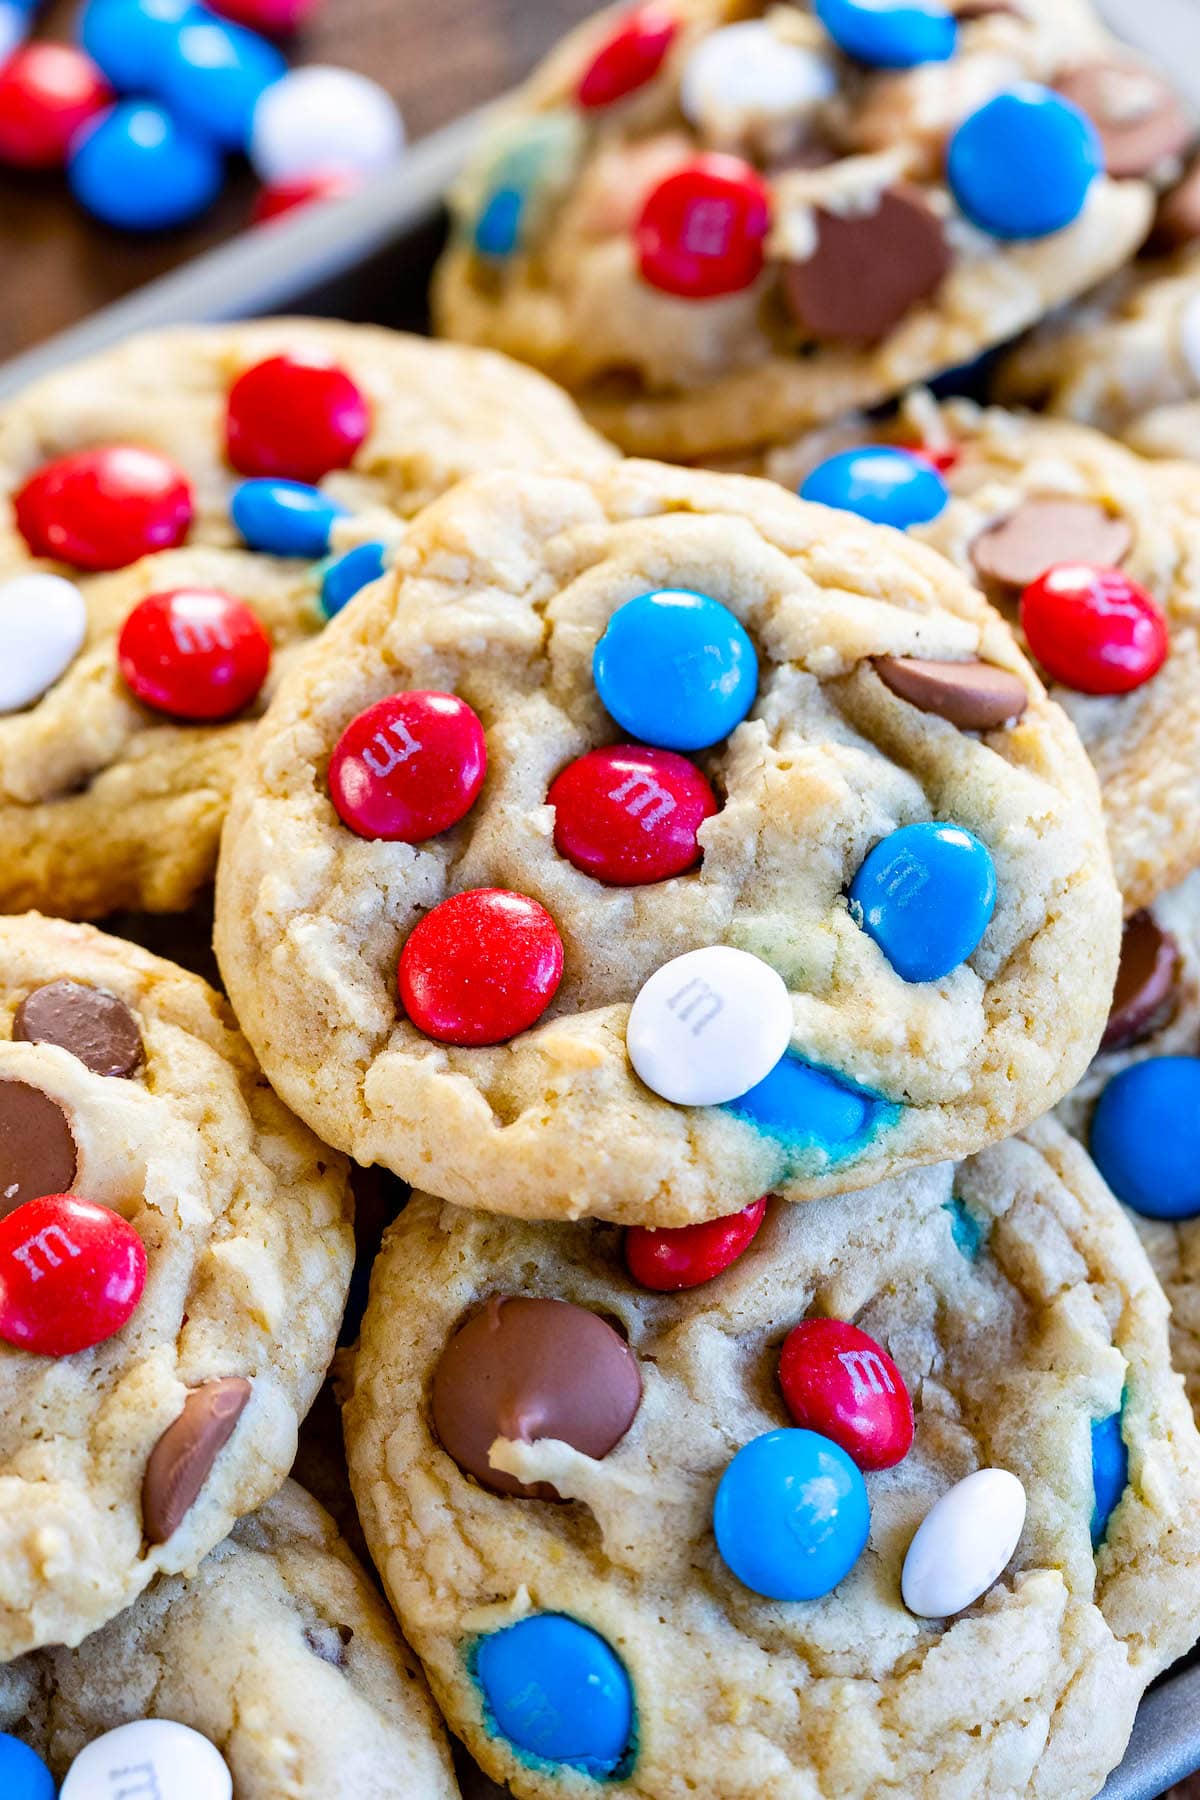 chocolate chip cookies and red white and blue m&ms baked in.